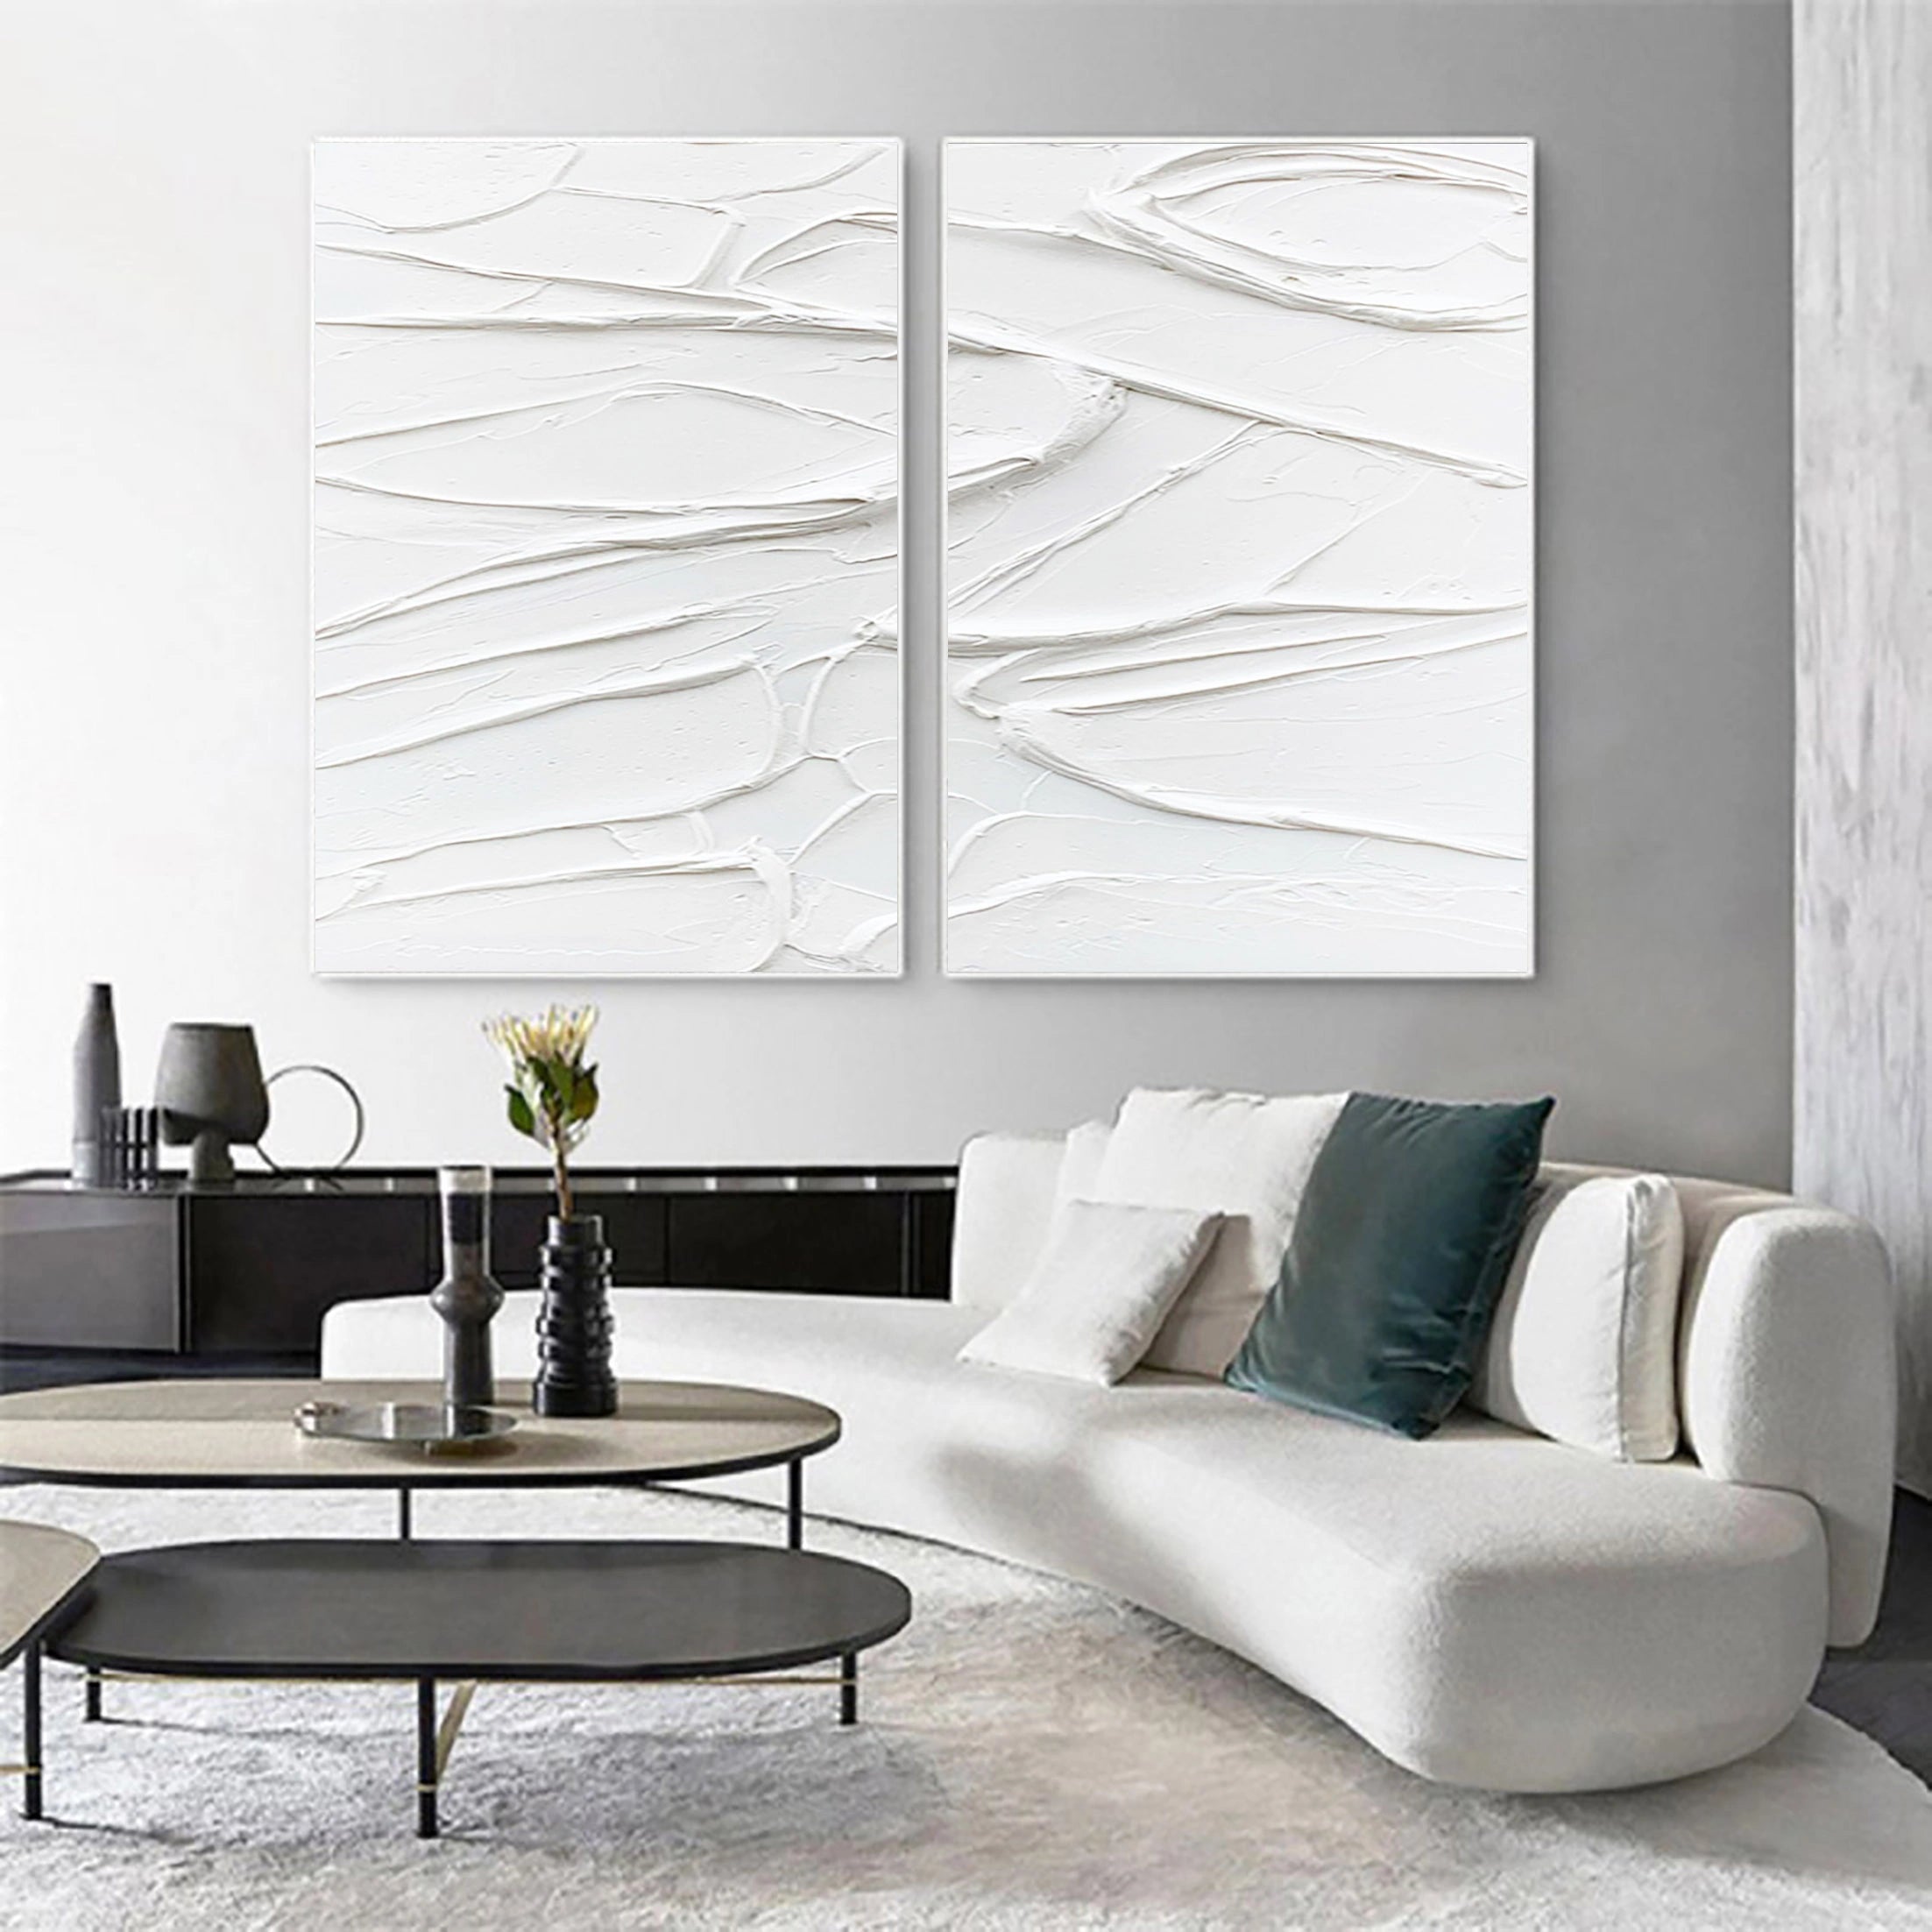 Set of 2 White Textured Plaster Art Canvas, Large Abstract Painting for Room Decor